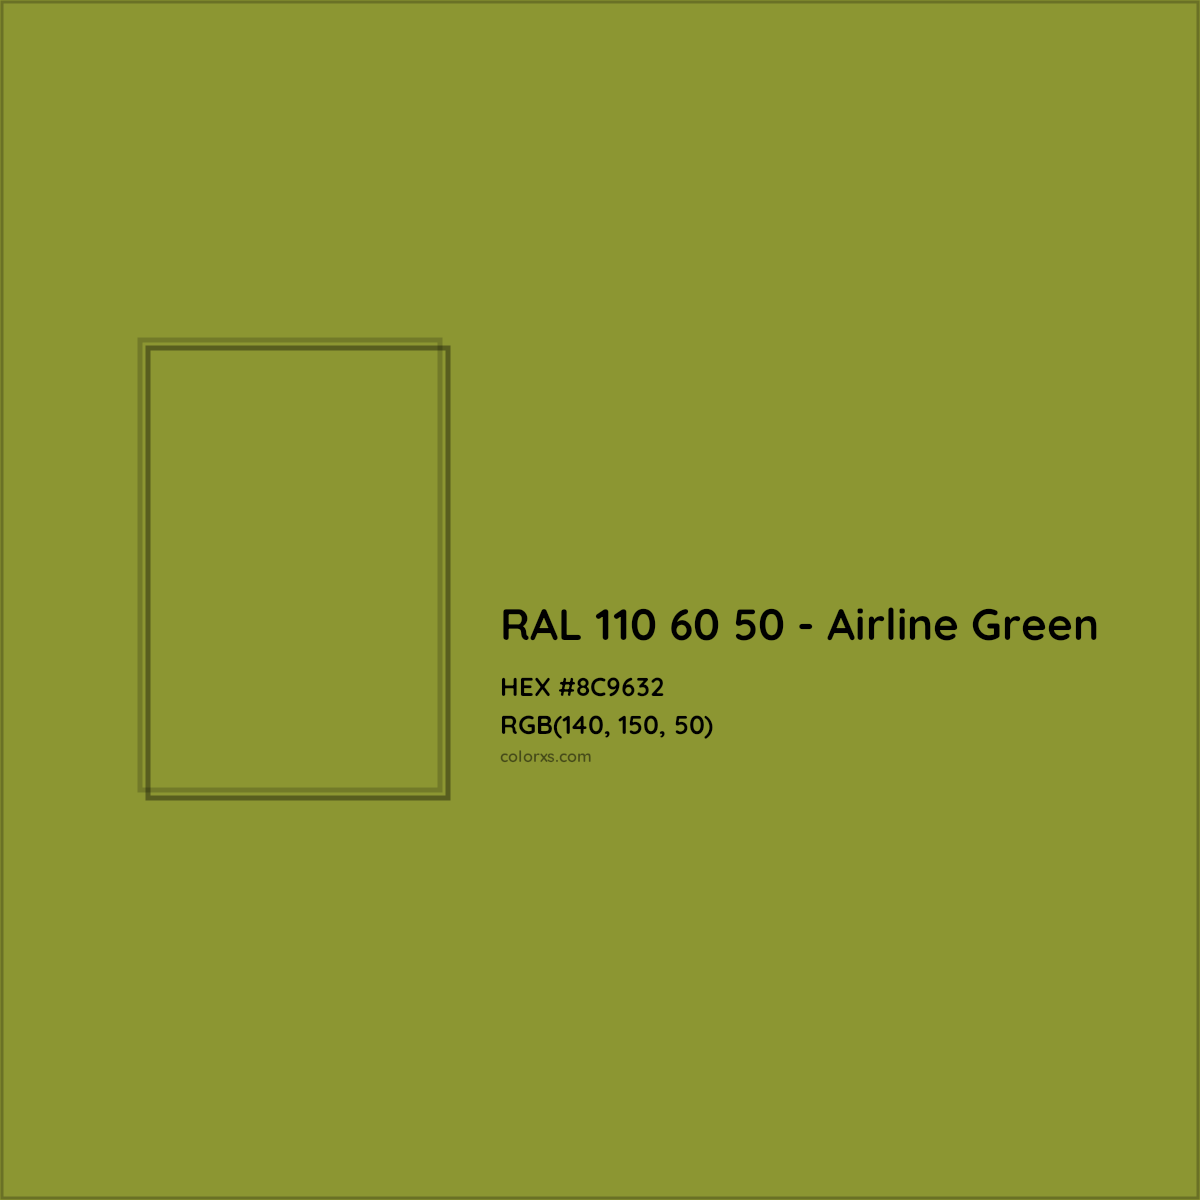 HEX #8C9632 RAL 110 60 50 - Airline Green CMS RAL Design - Color Code